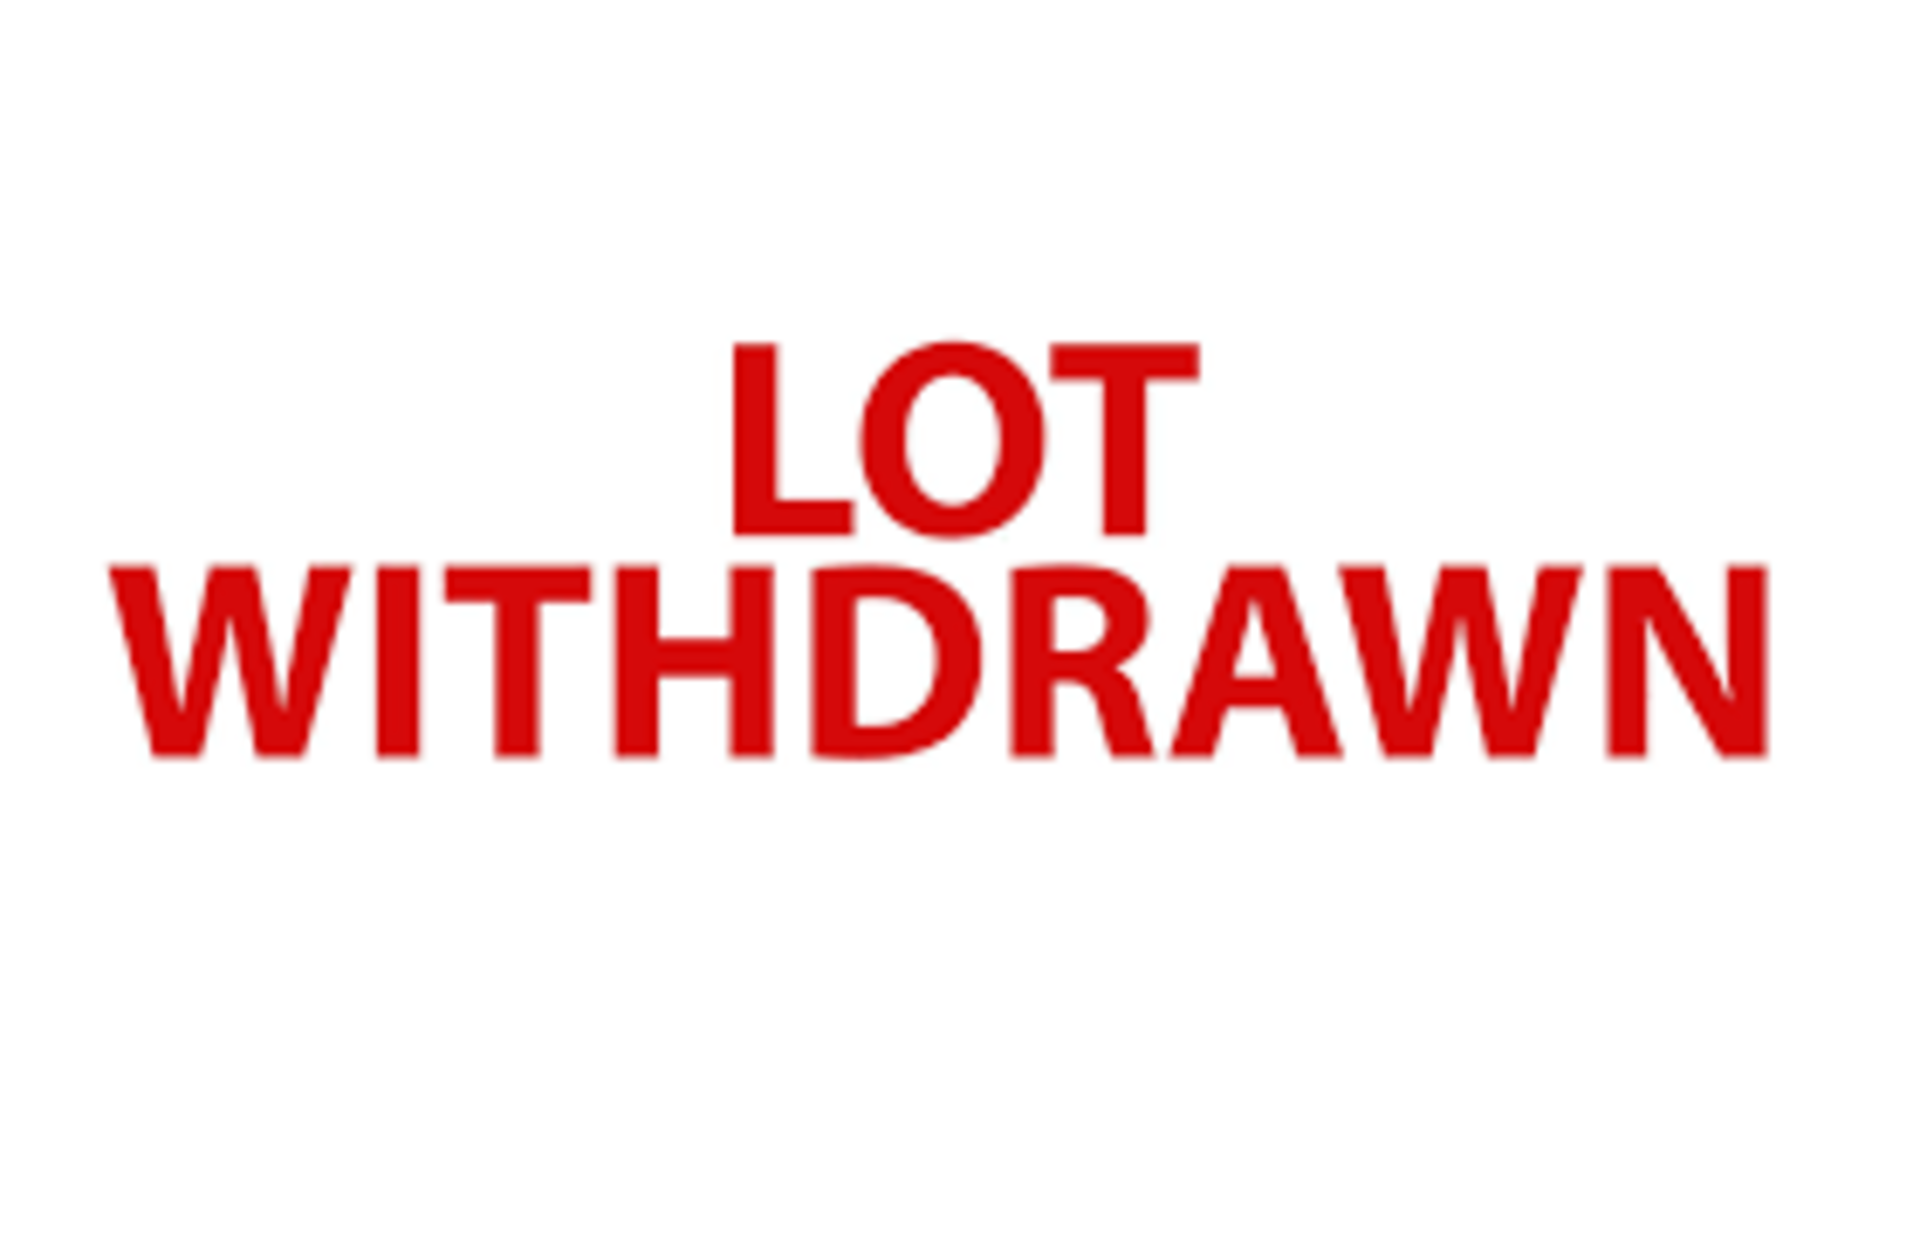 Lot Withdrawn - Sorry for any inconvenience